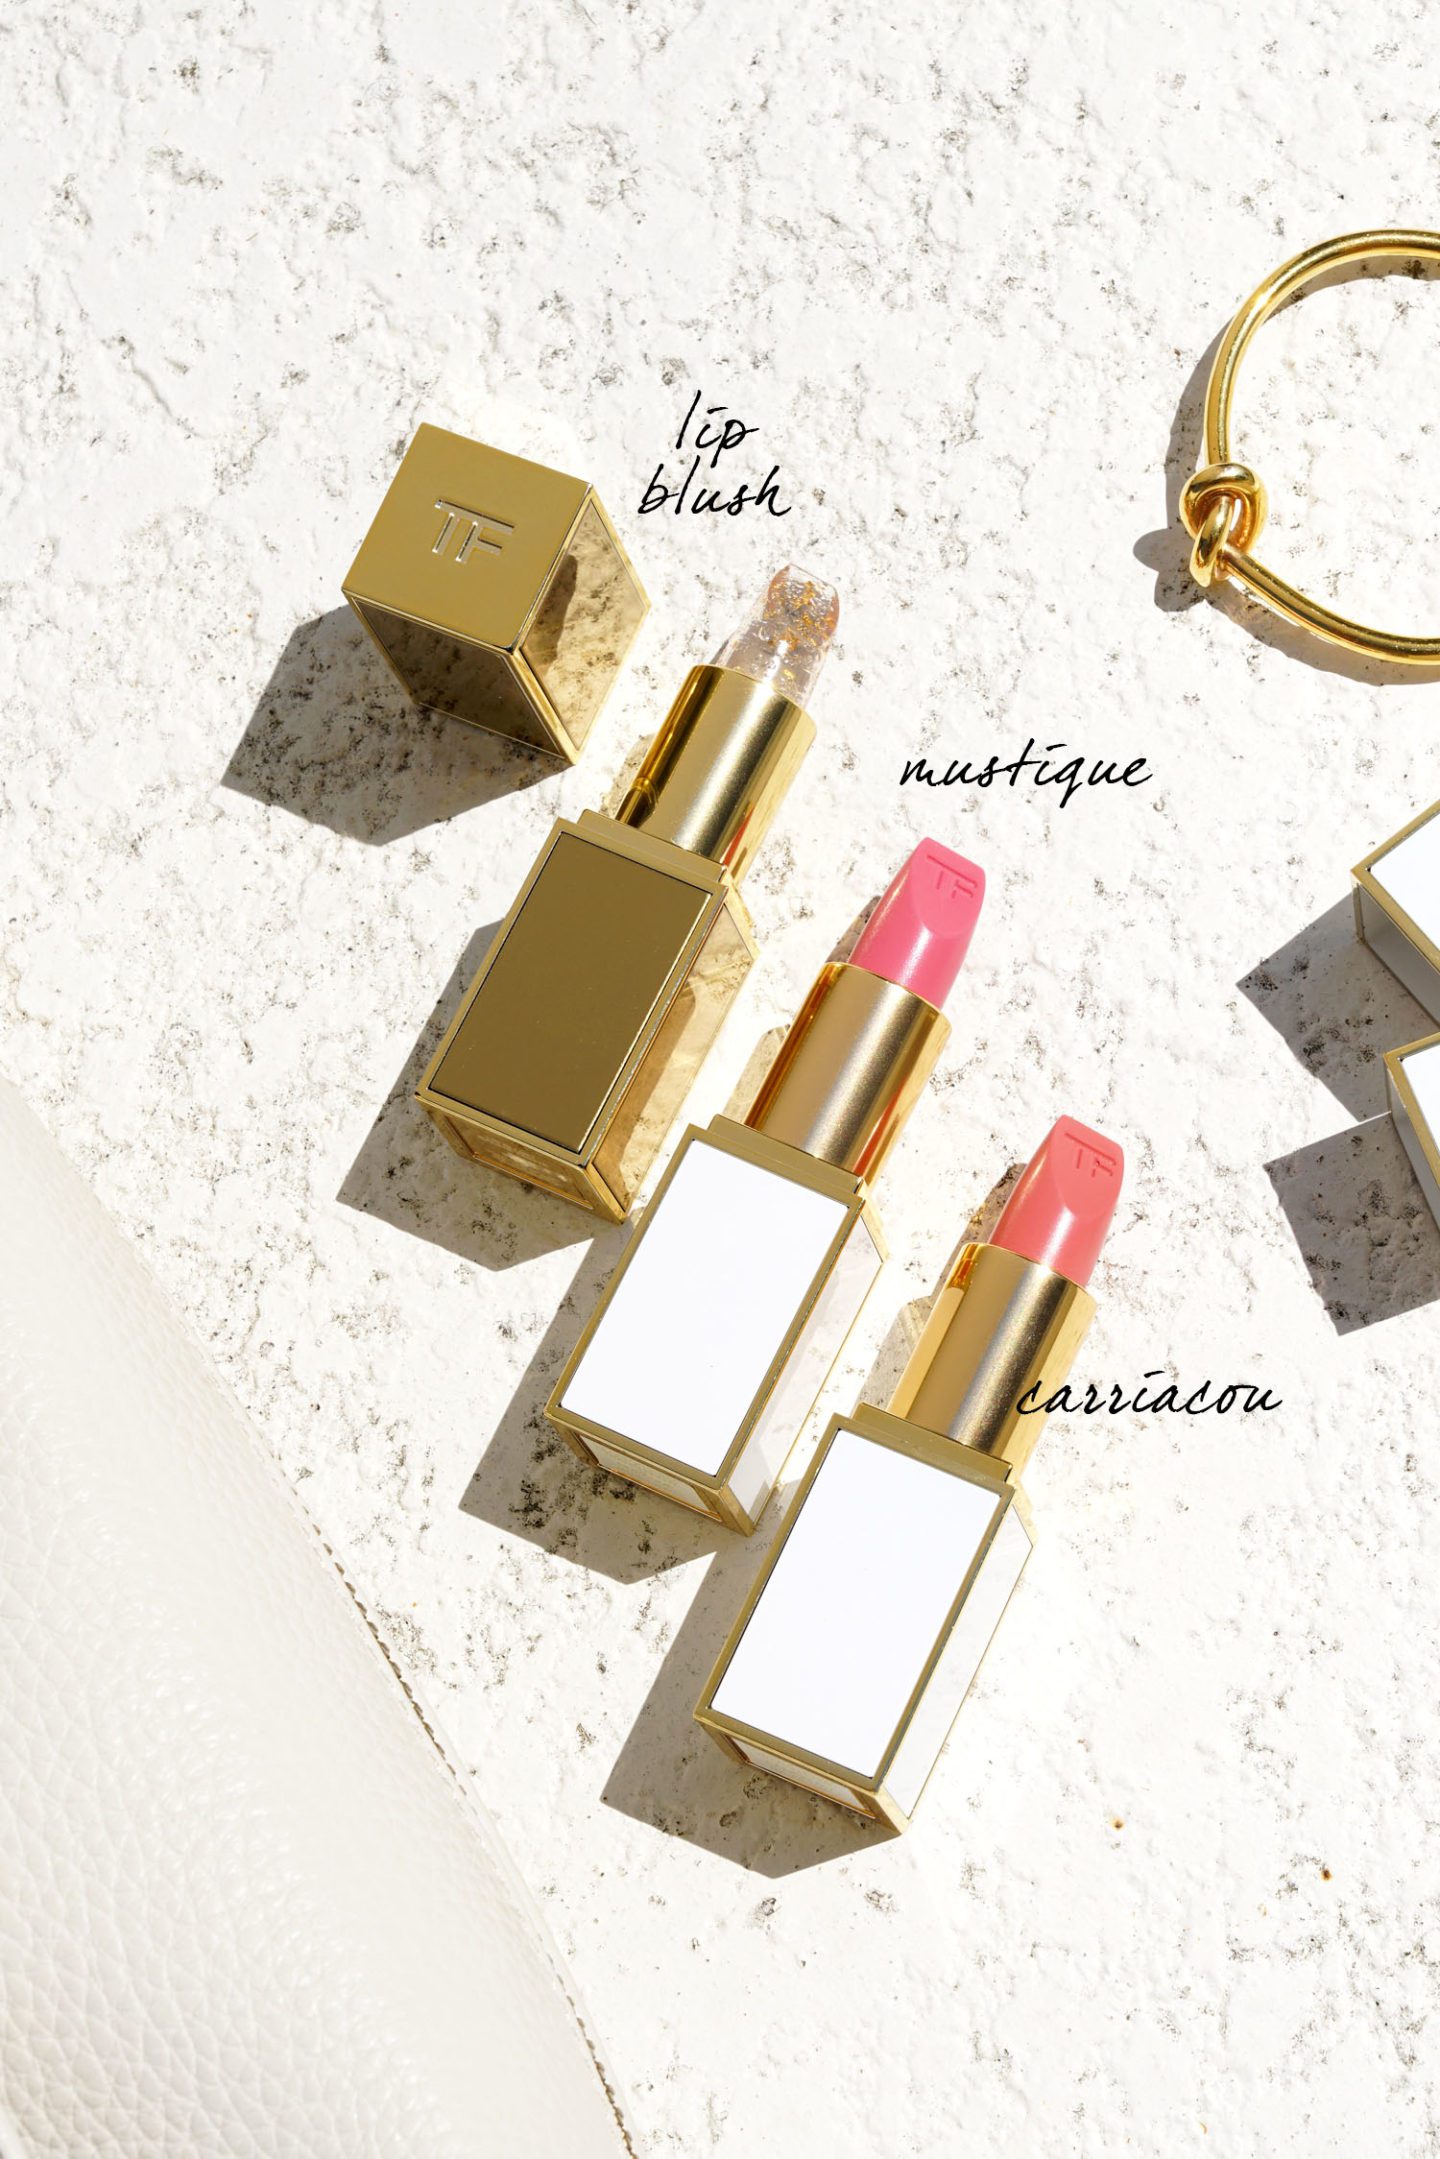 Tom Ford Soleil Lip Blush, Lip Color Sheer in Mustique and Carriacou